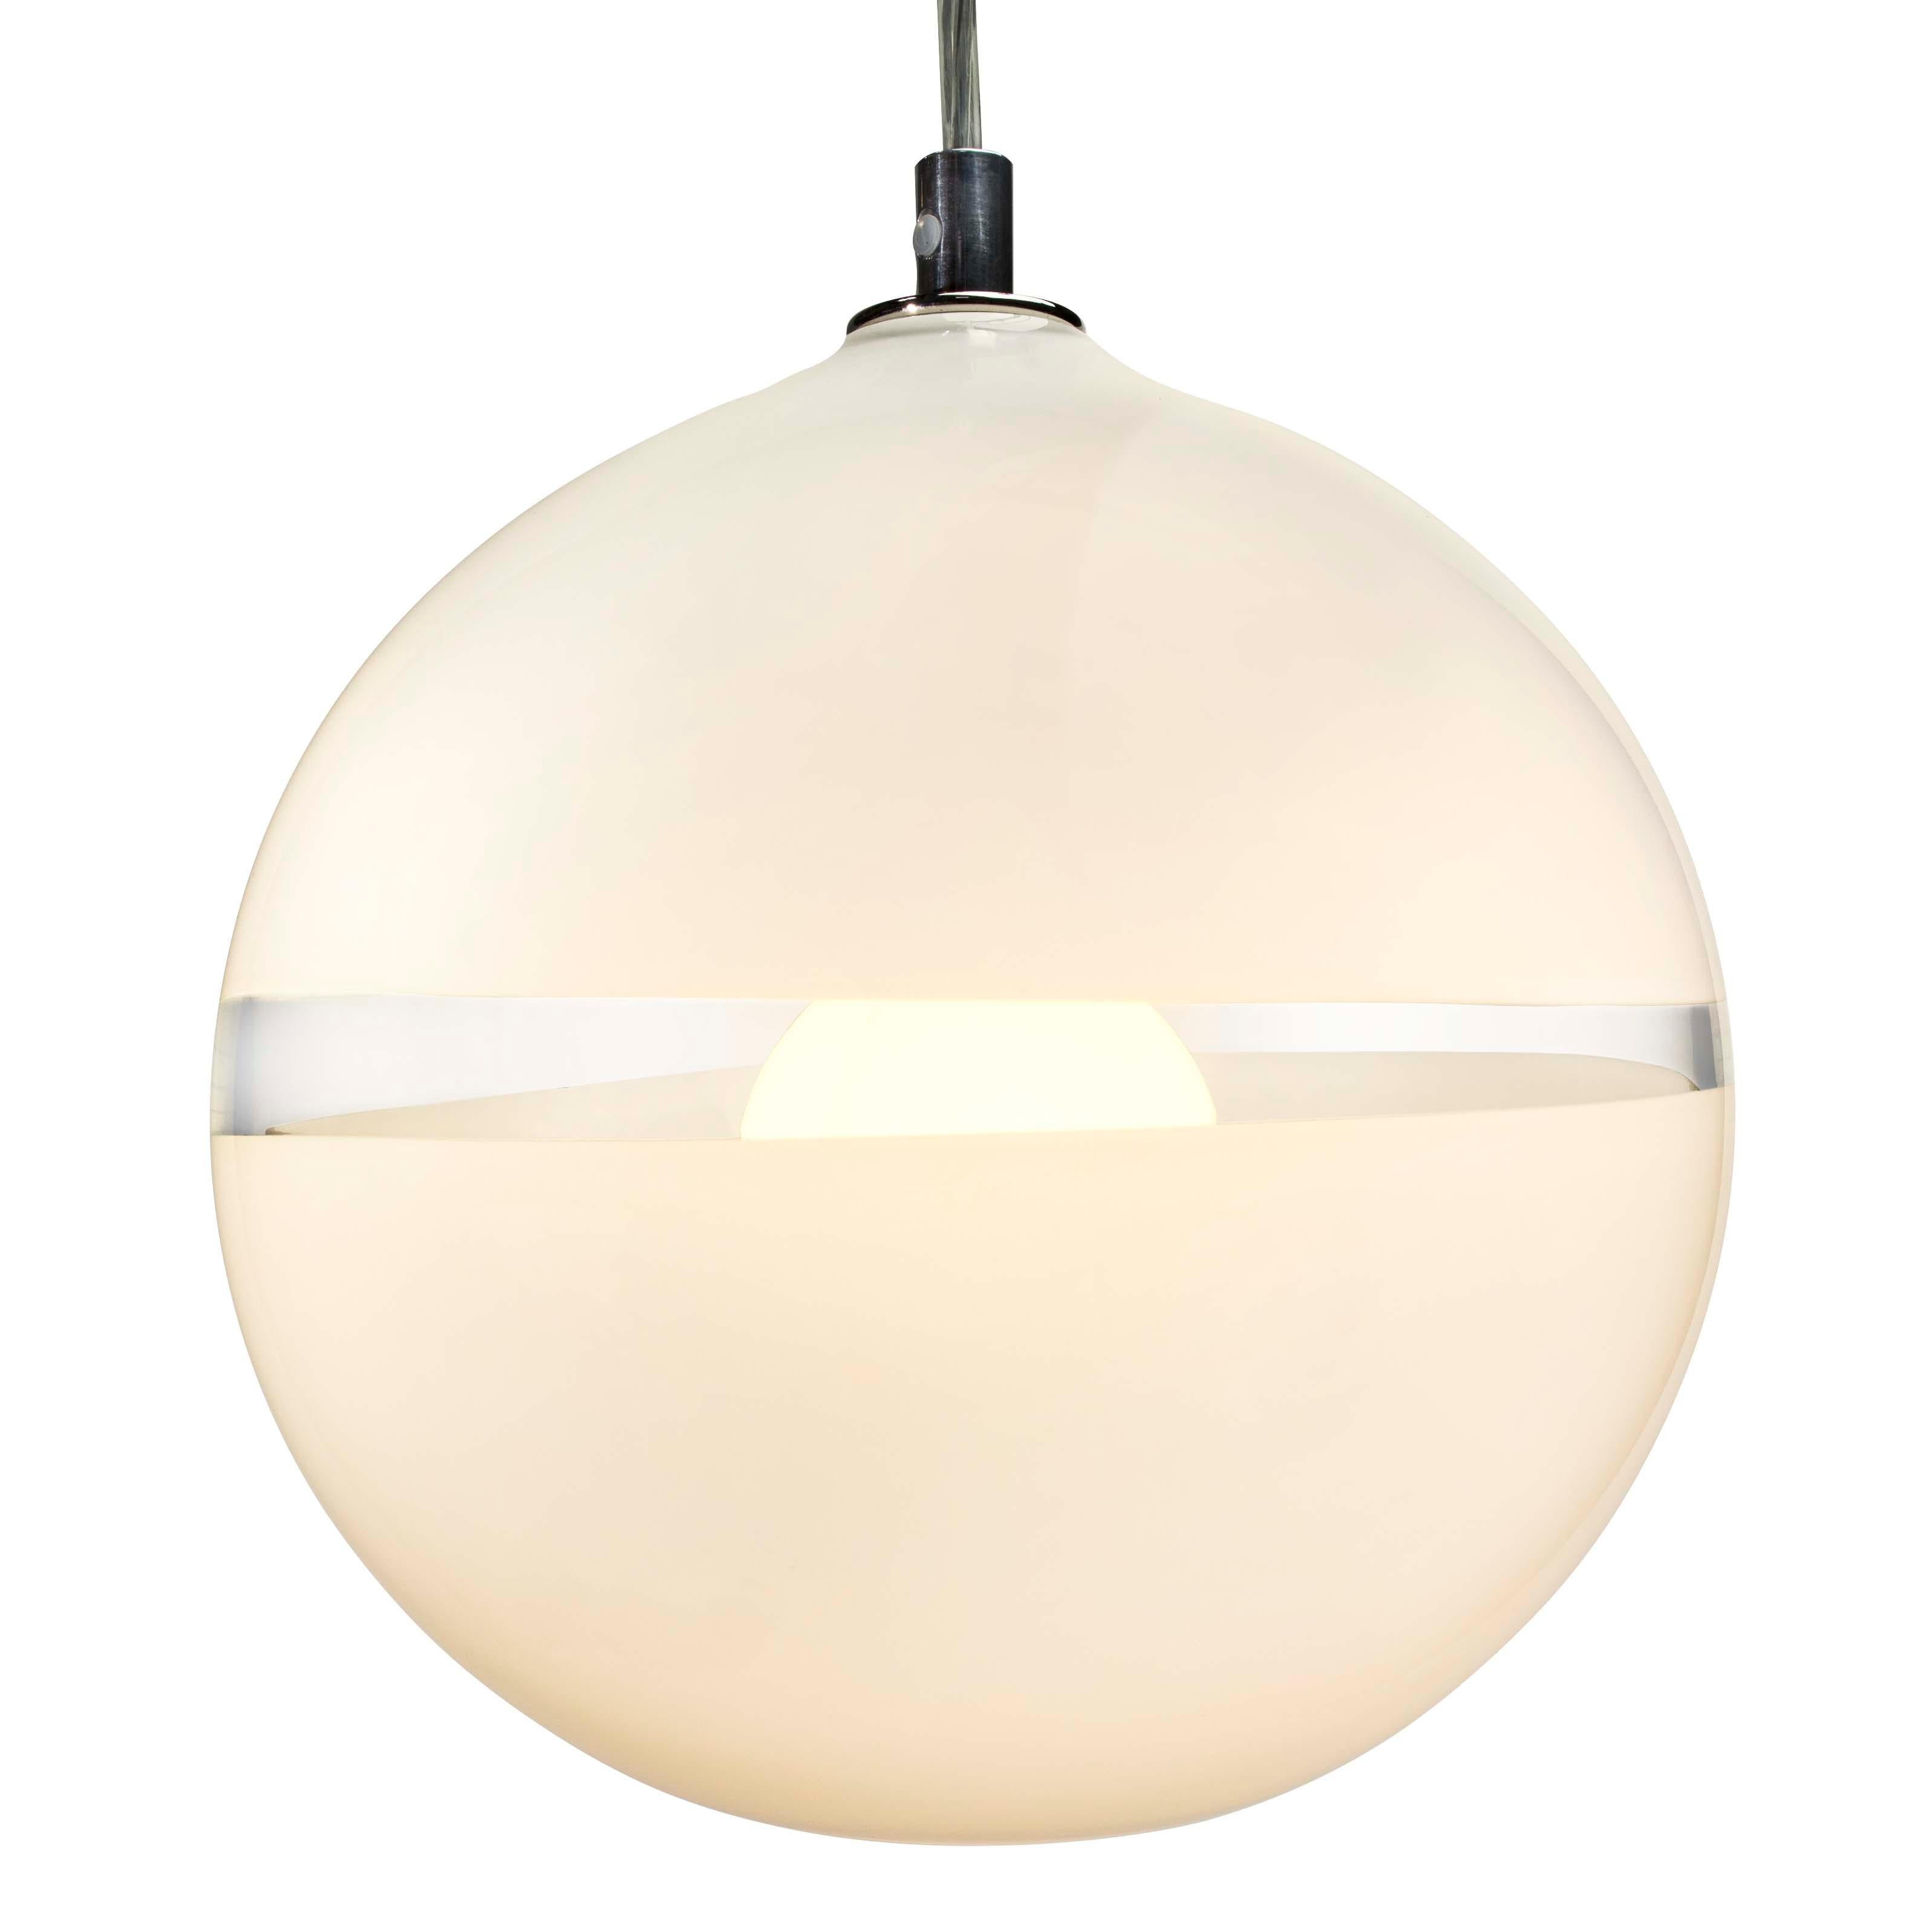 Lattimo Large Orb Pendant Light, Hand Blown Glass - Made to Order